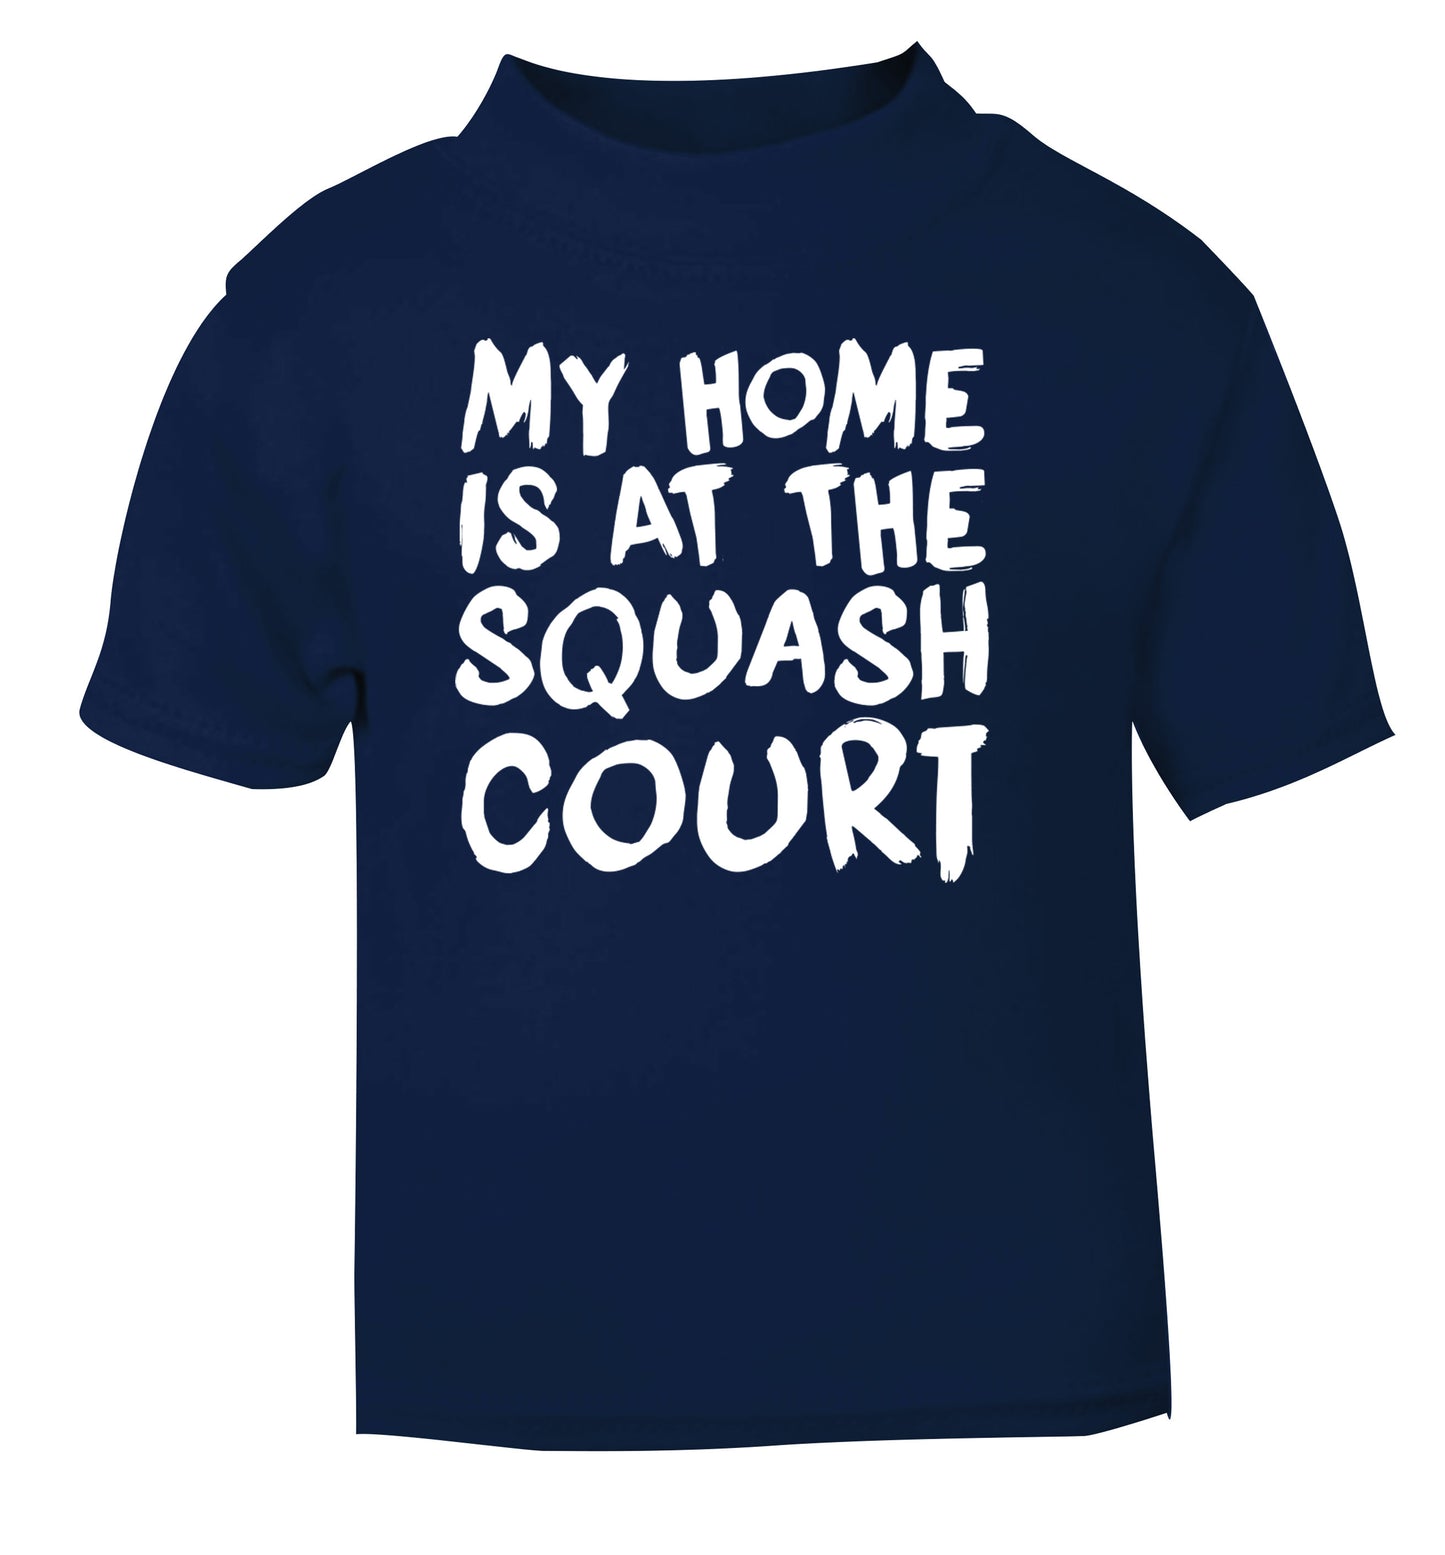 My home is at the squash court navy Baby Toddler Tshirt 2 Years